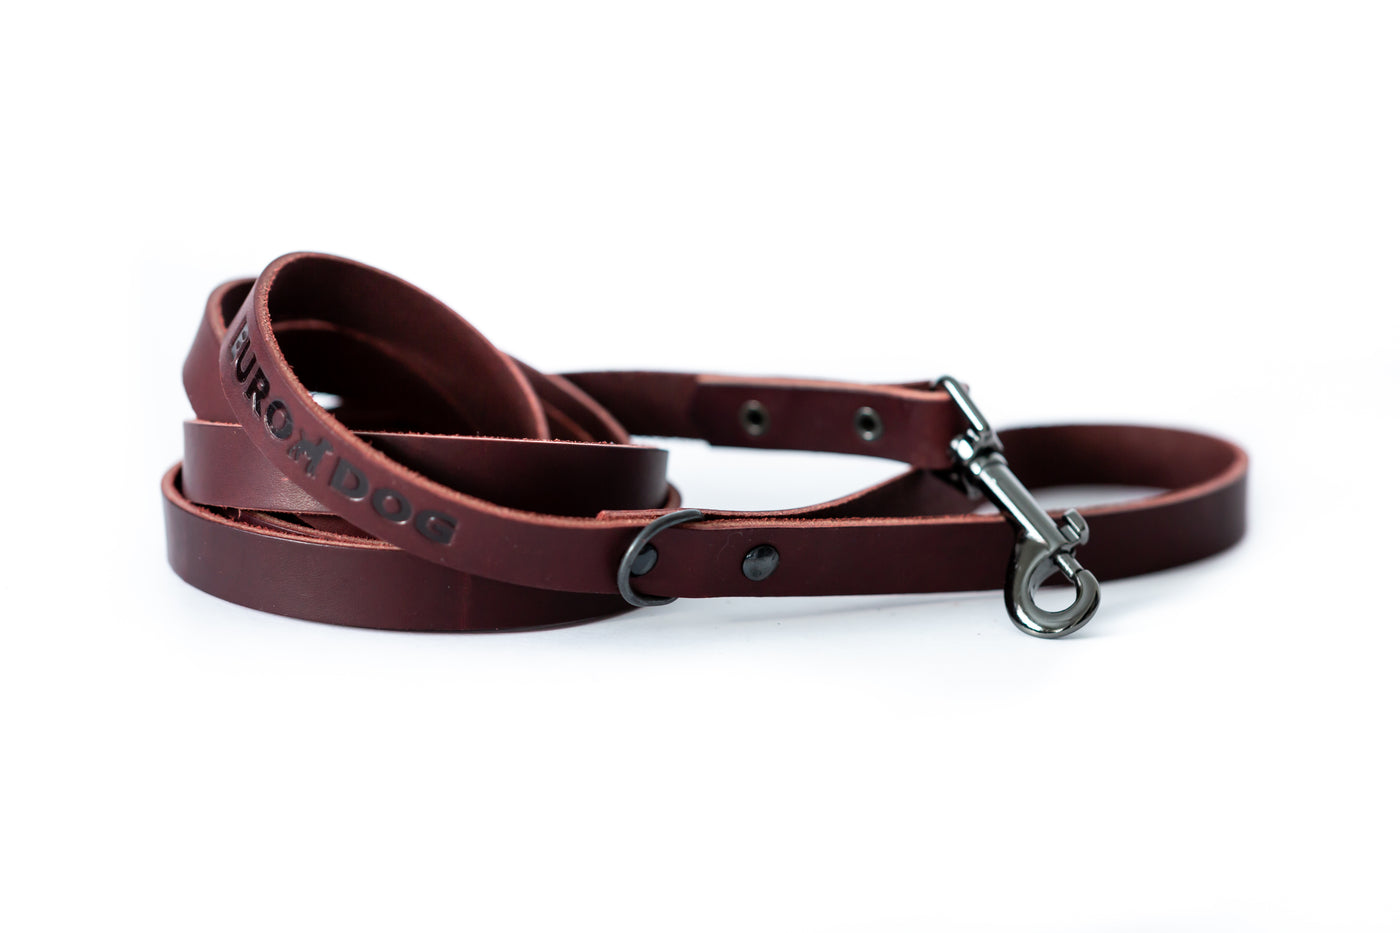 Euro Dog Sport Style Collar and Leash SET Full-Grain American Leather Made in USA